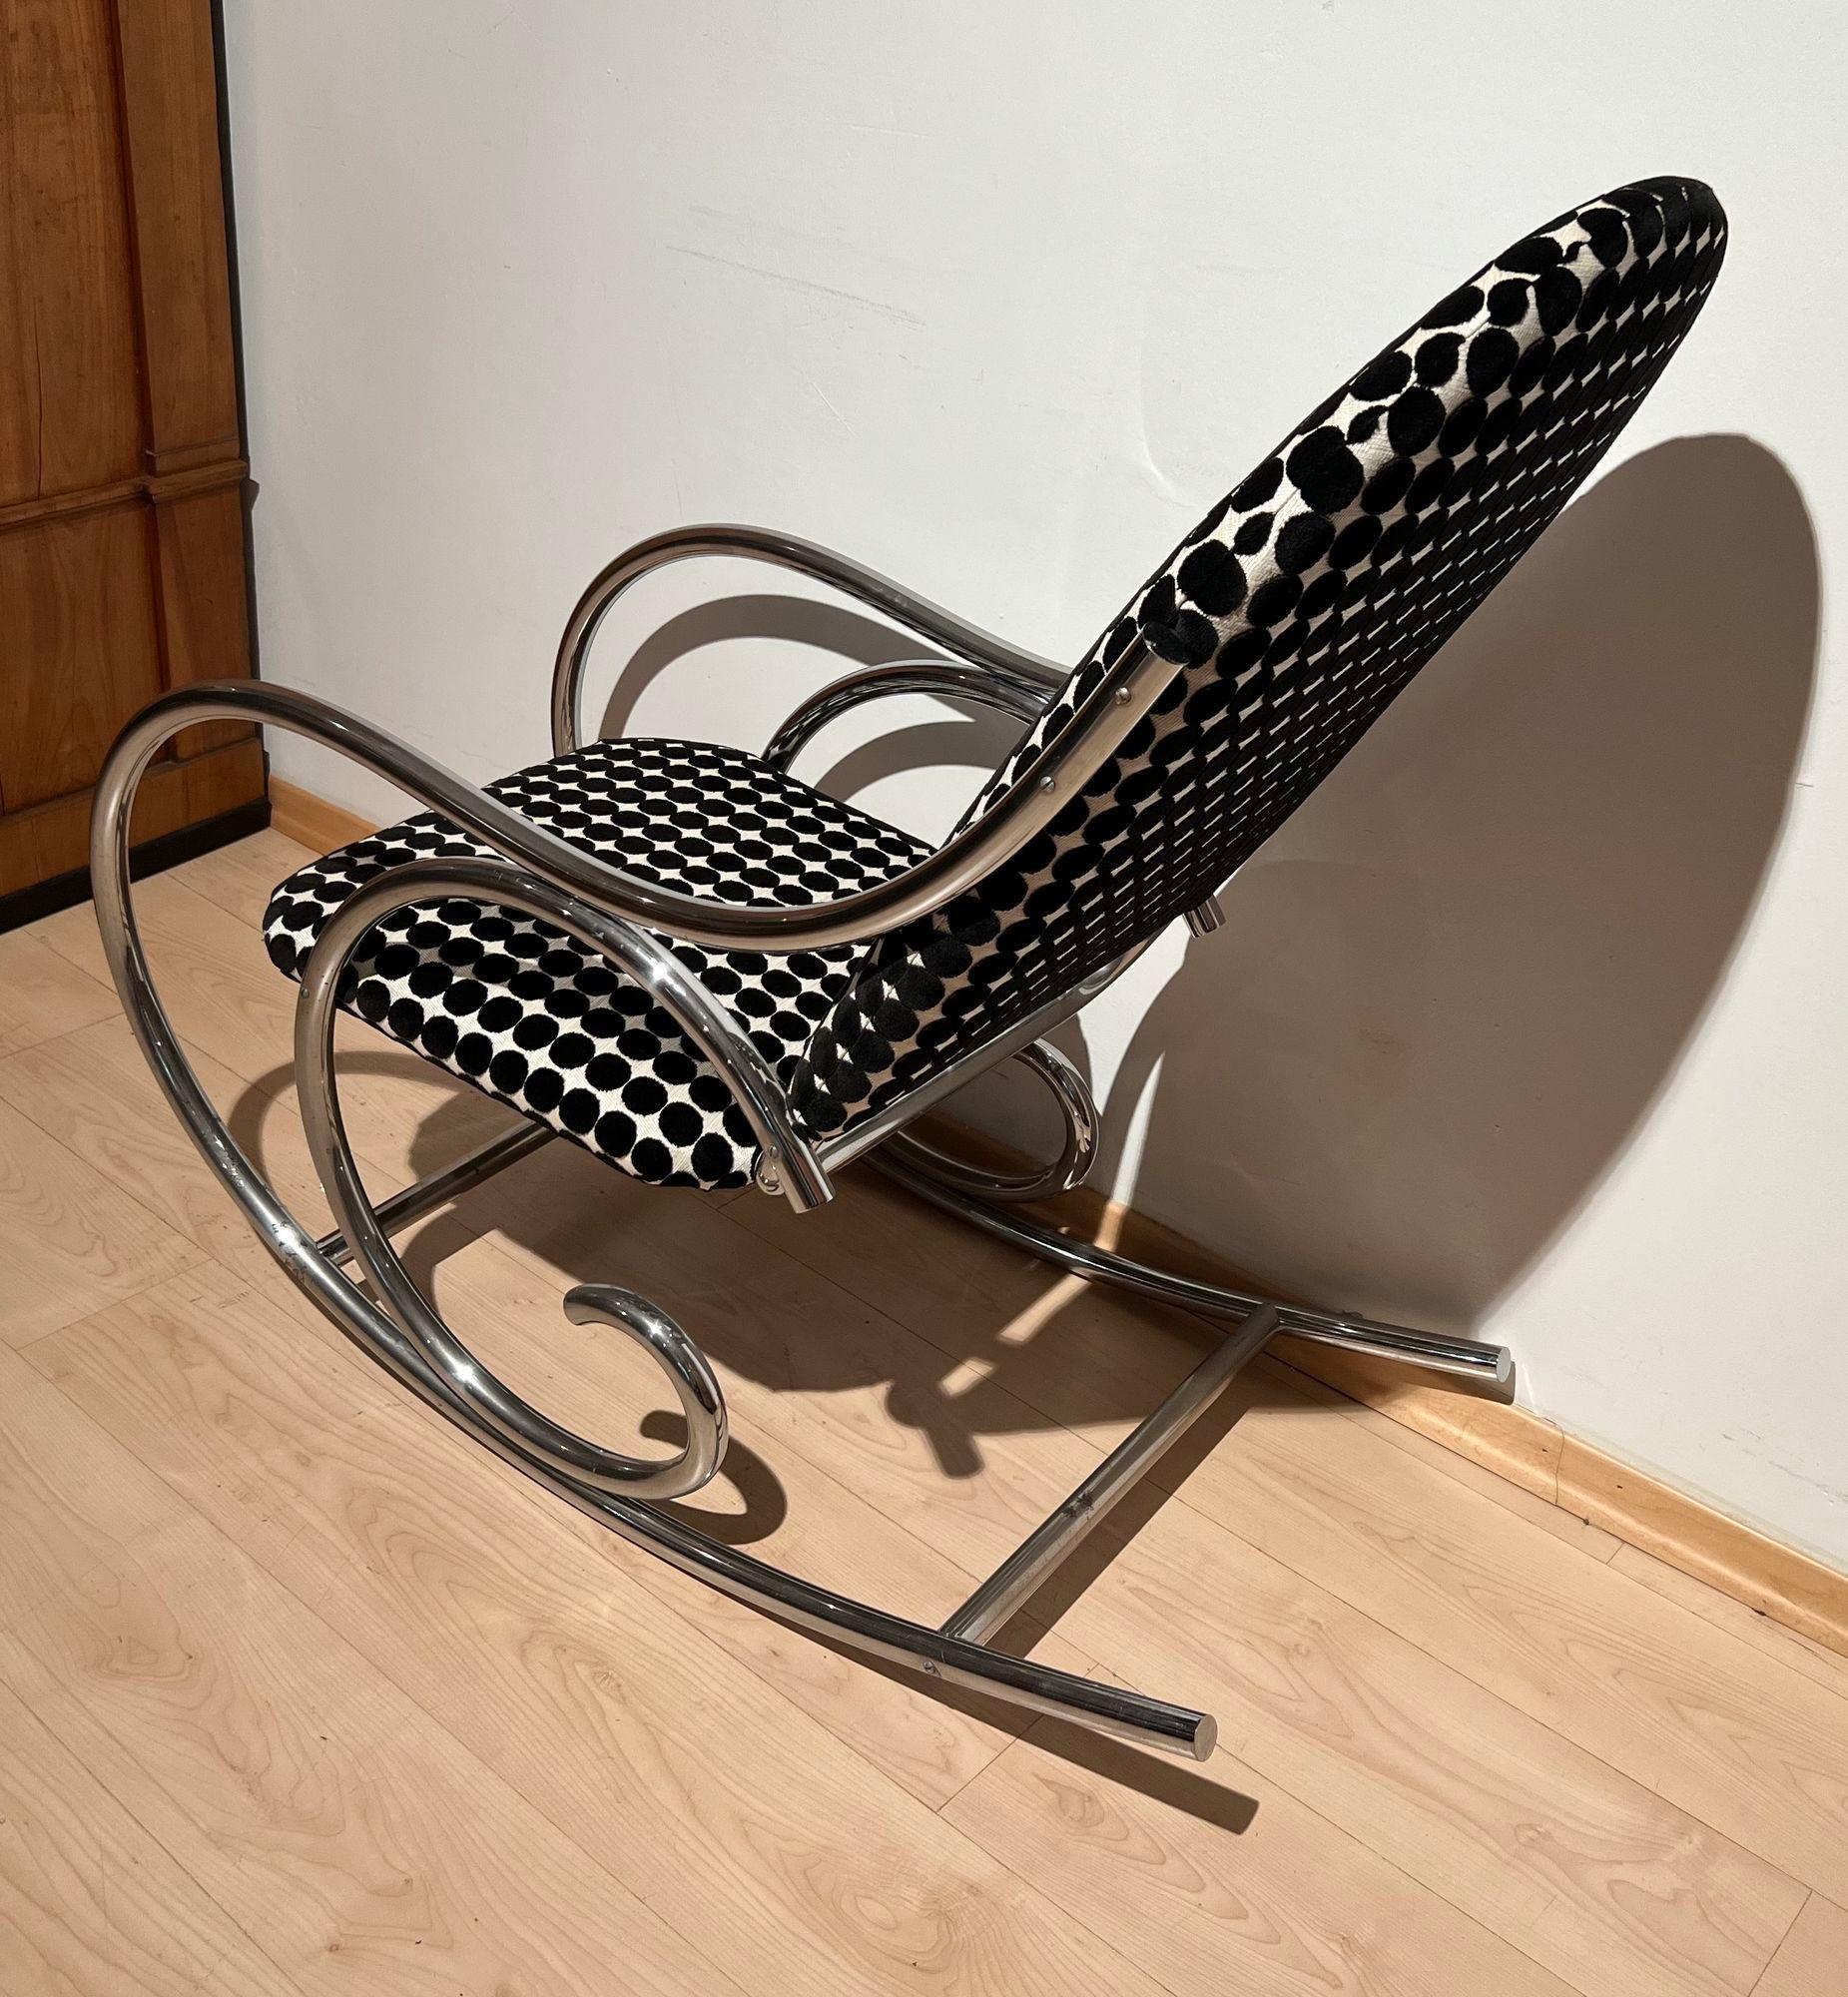 Mid-20th Century Bauhaus Rocking Chair, Chromed Steeltubes, Germany, circa 1930 For Sale